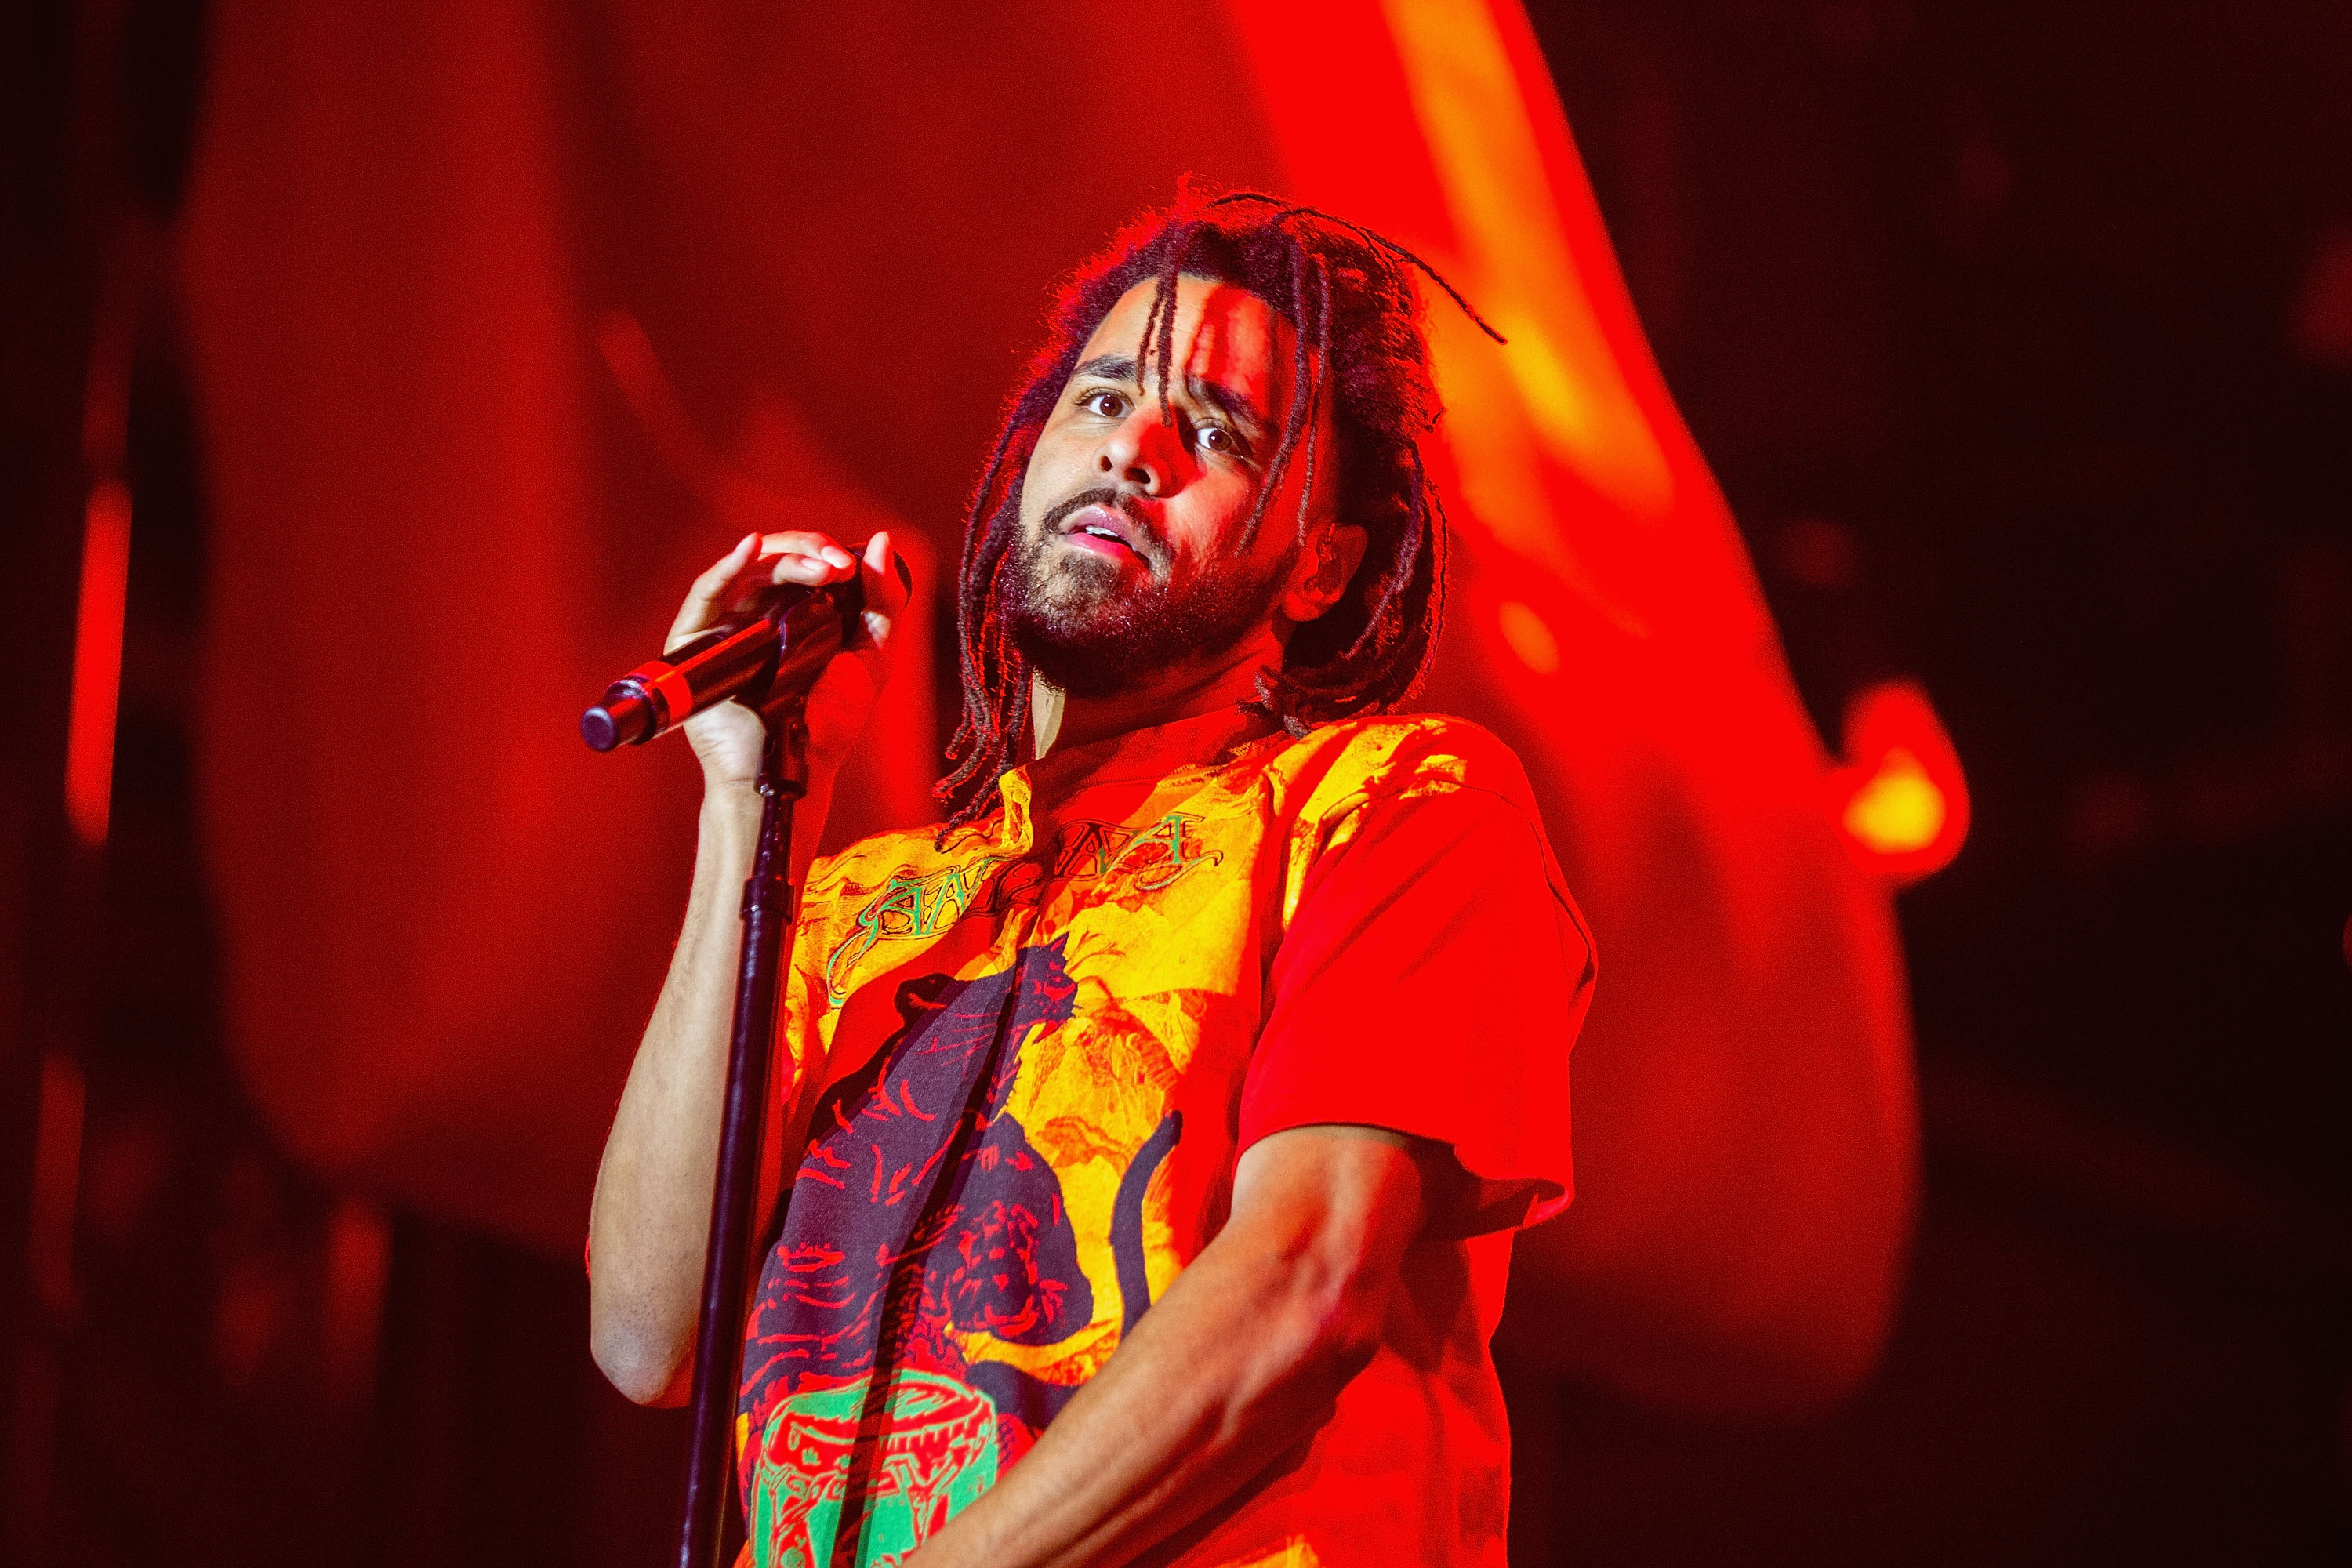 J Cole appeared remorseful for years of feuding with LA rapper Kendrick and apologised on stage at his Dreamville festival